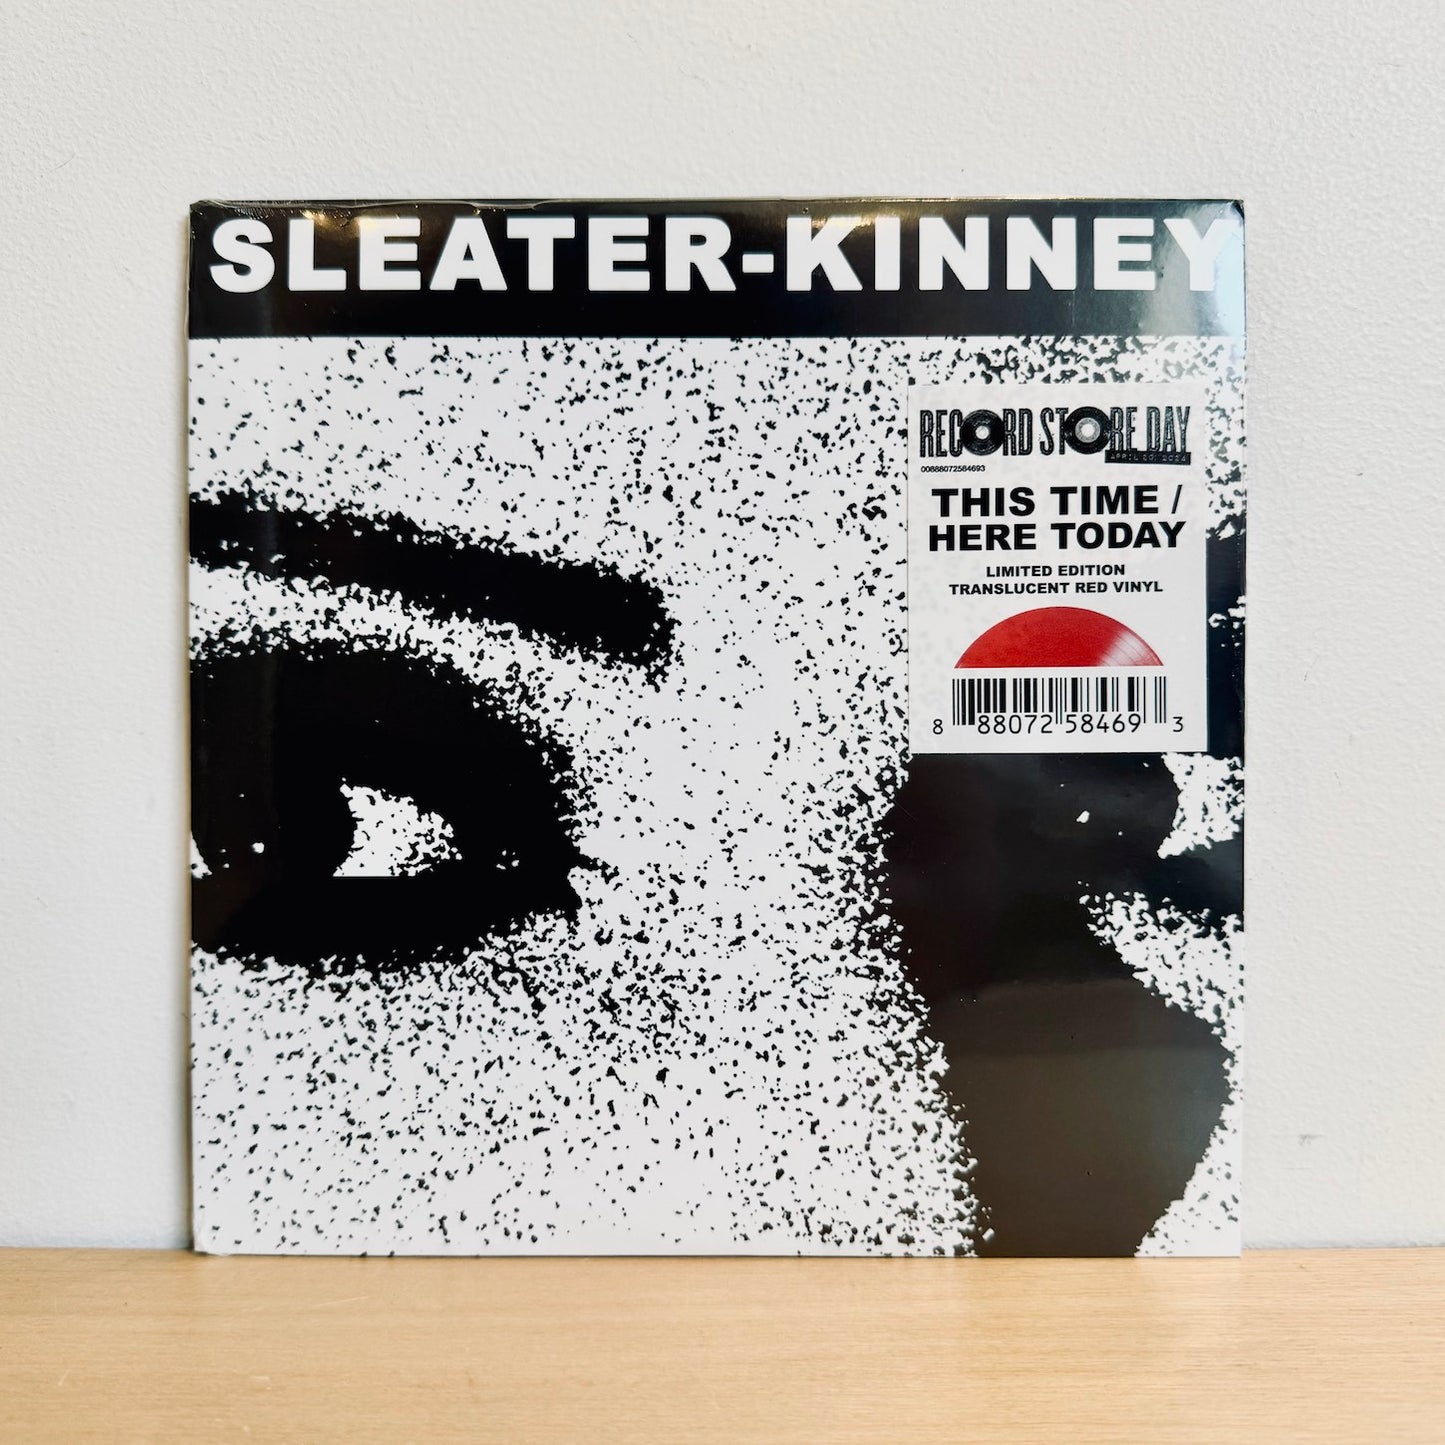 RSD2024 - SLEATER-KINNEY - THIS TIME/ HERE TODAY. 7" EP [Ltd. Ed. Translucent Red Vinyl / Edition of 2000]